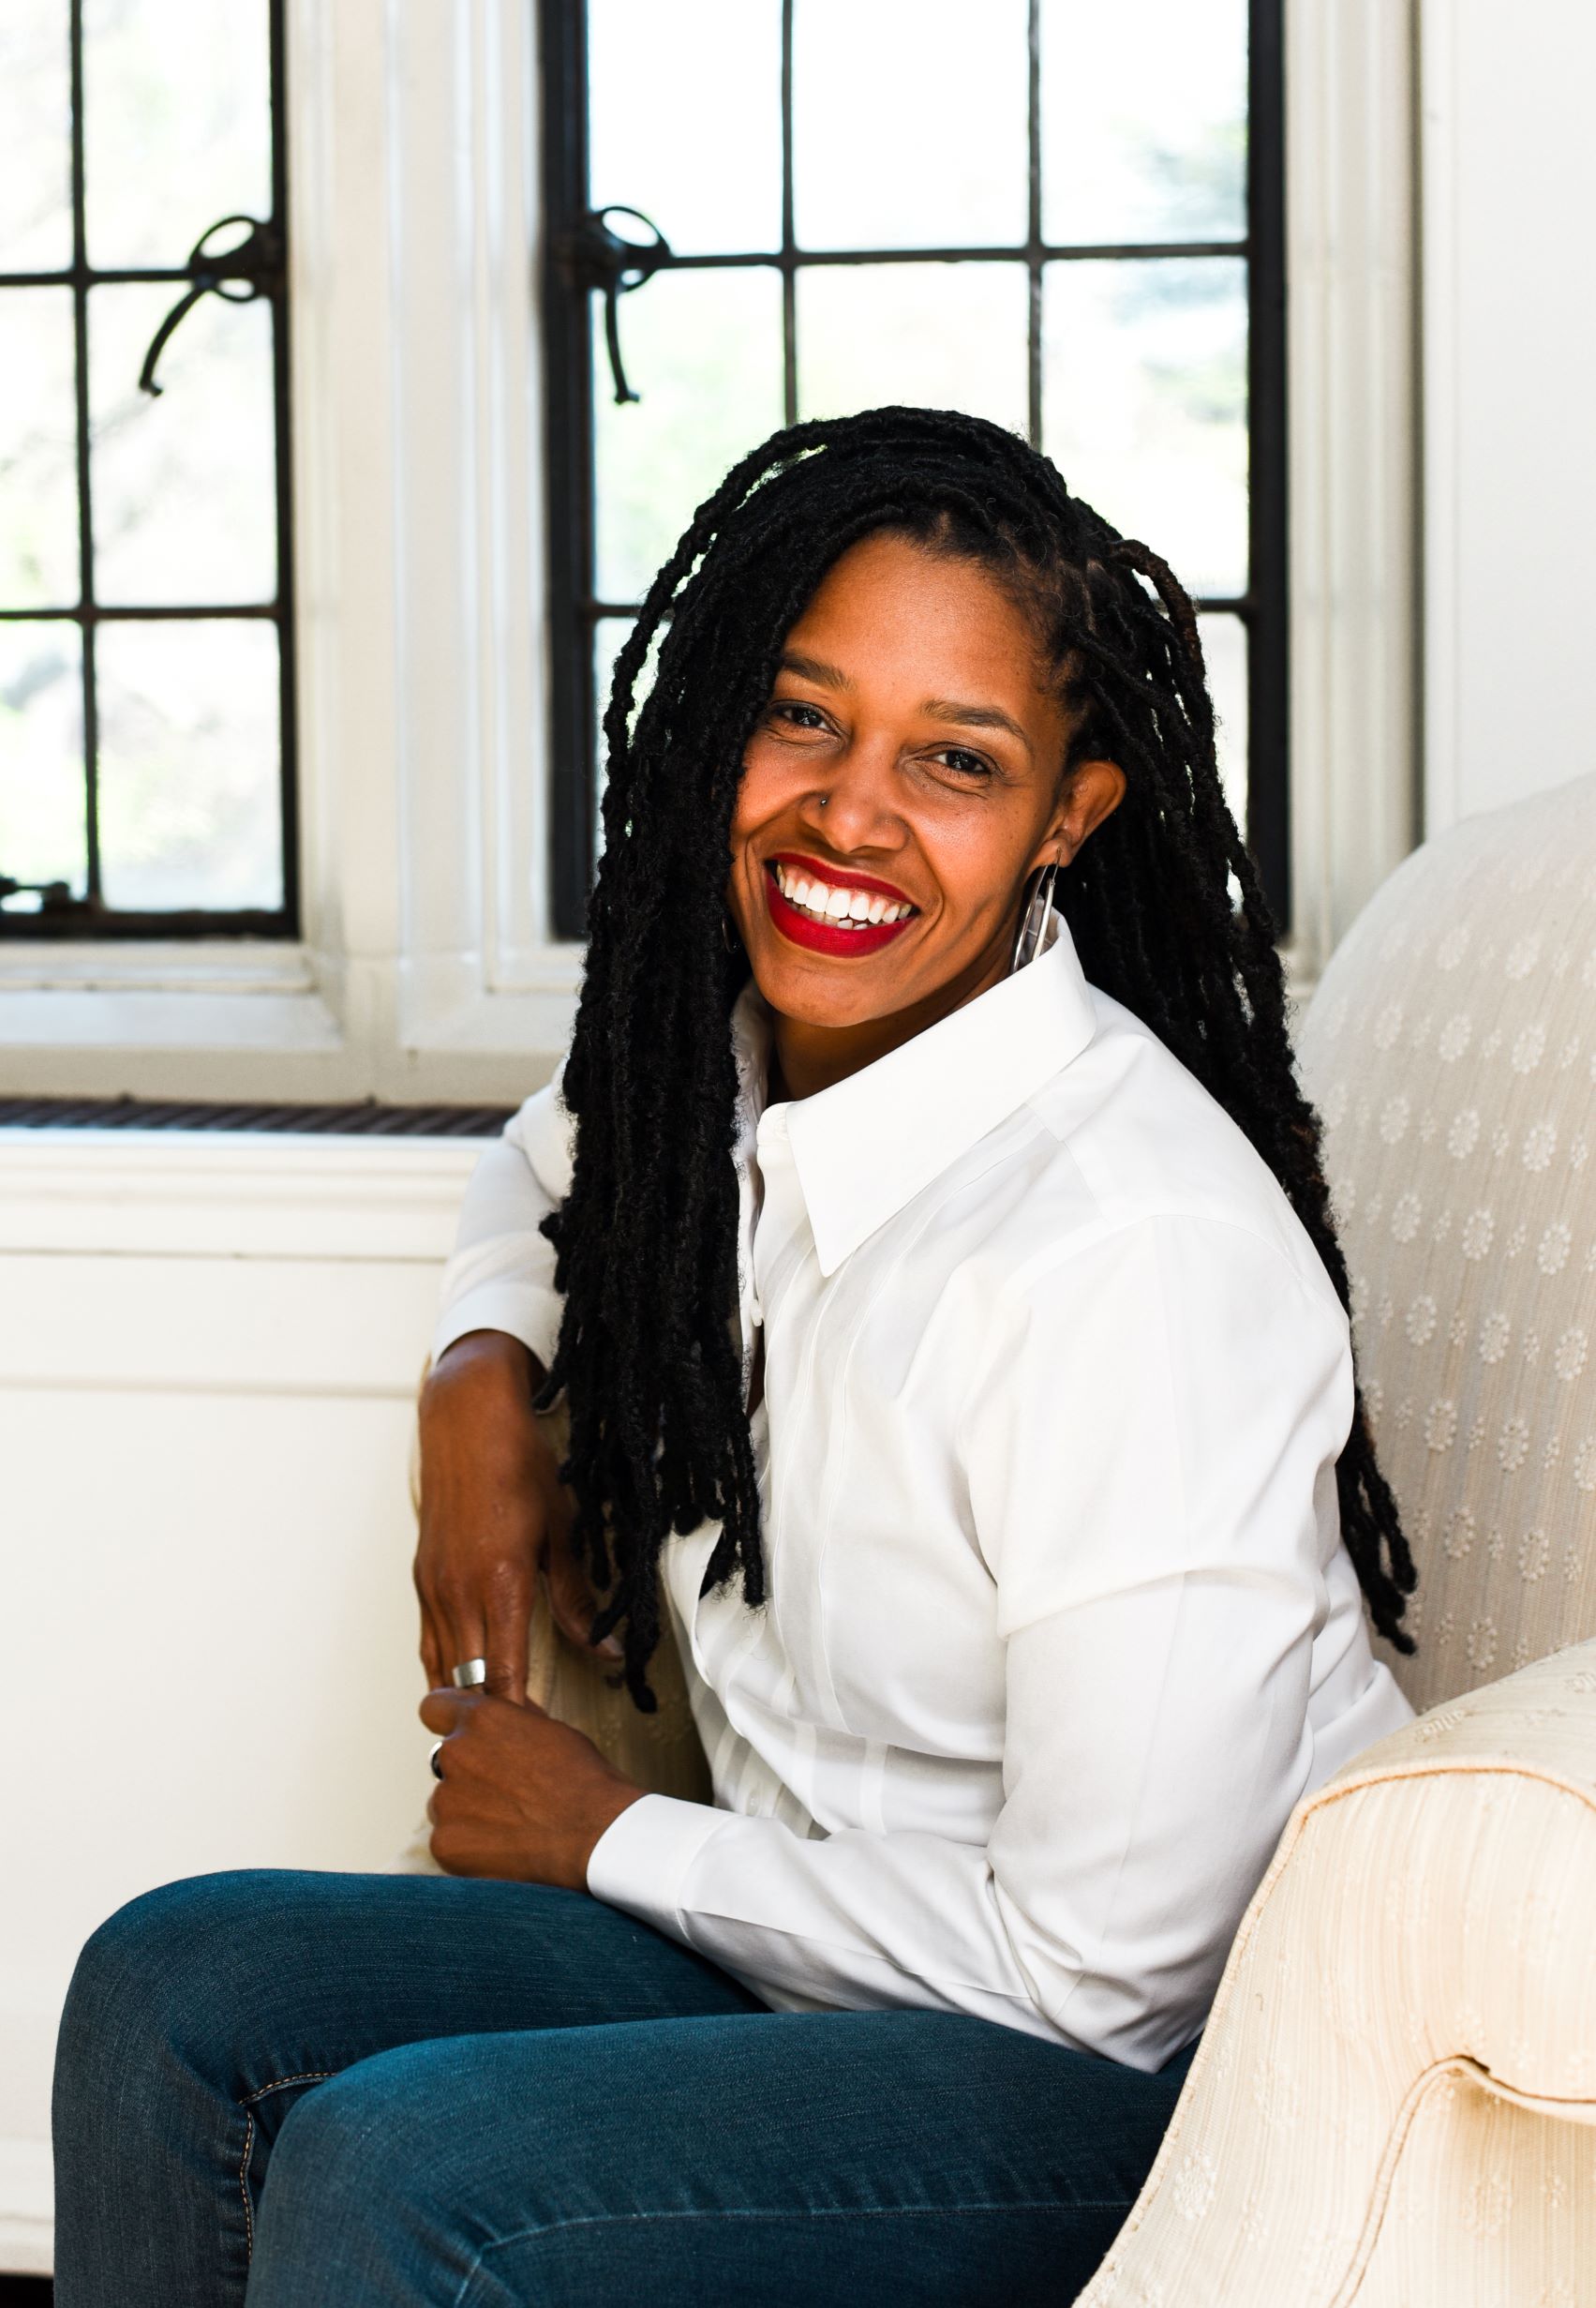 Pamela Weaver, a Black woman, is sitting on a antique white couch in a white oxford shirt, jeans, red lipstick, and a relaxed smile